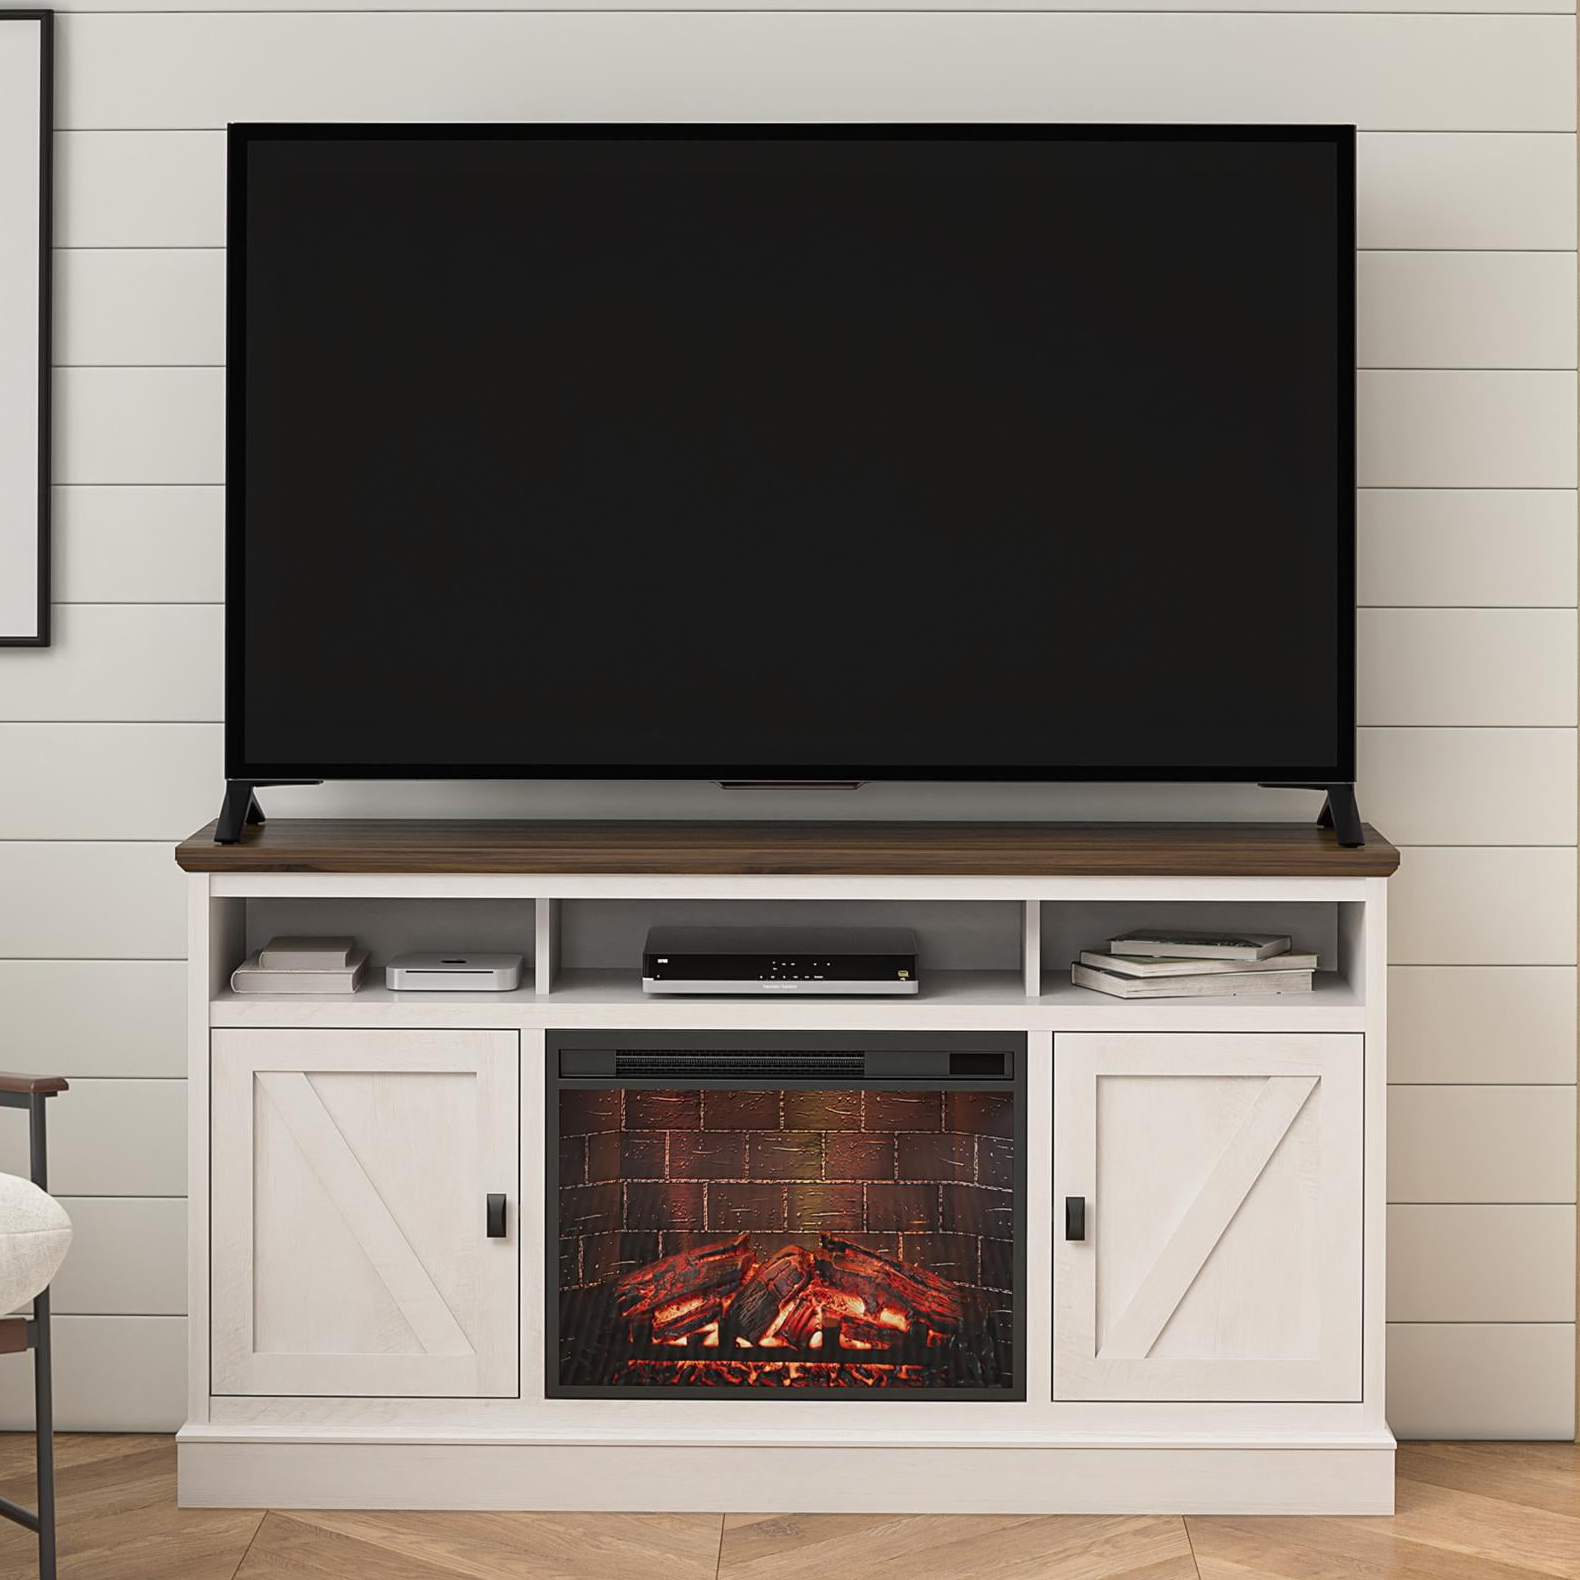 Ameriwood Home Ashton Lane Electric Fireplace TV Stand for TVs up to 65", Magnolia Oak/Columbia Walnut - image 1 of 32